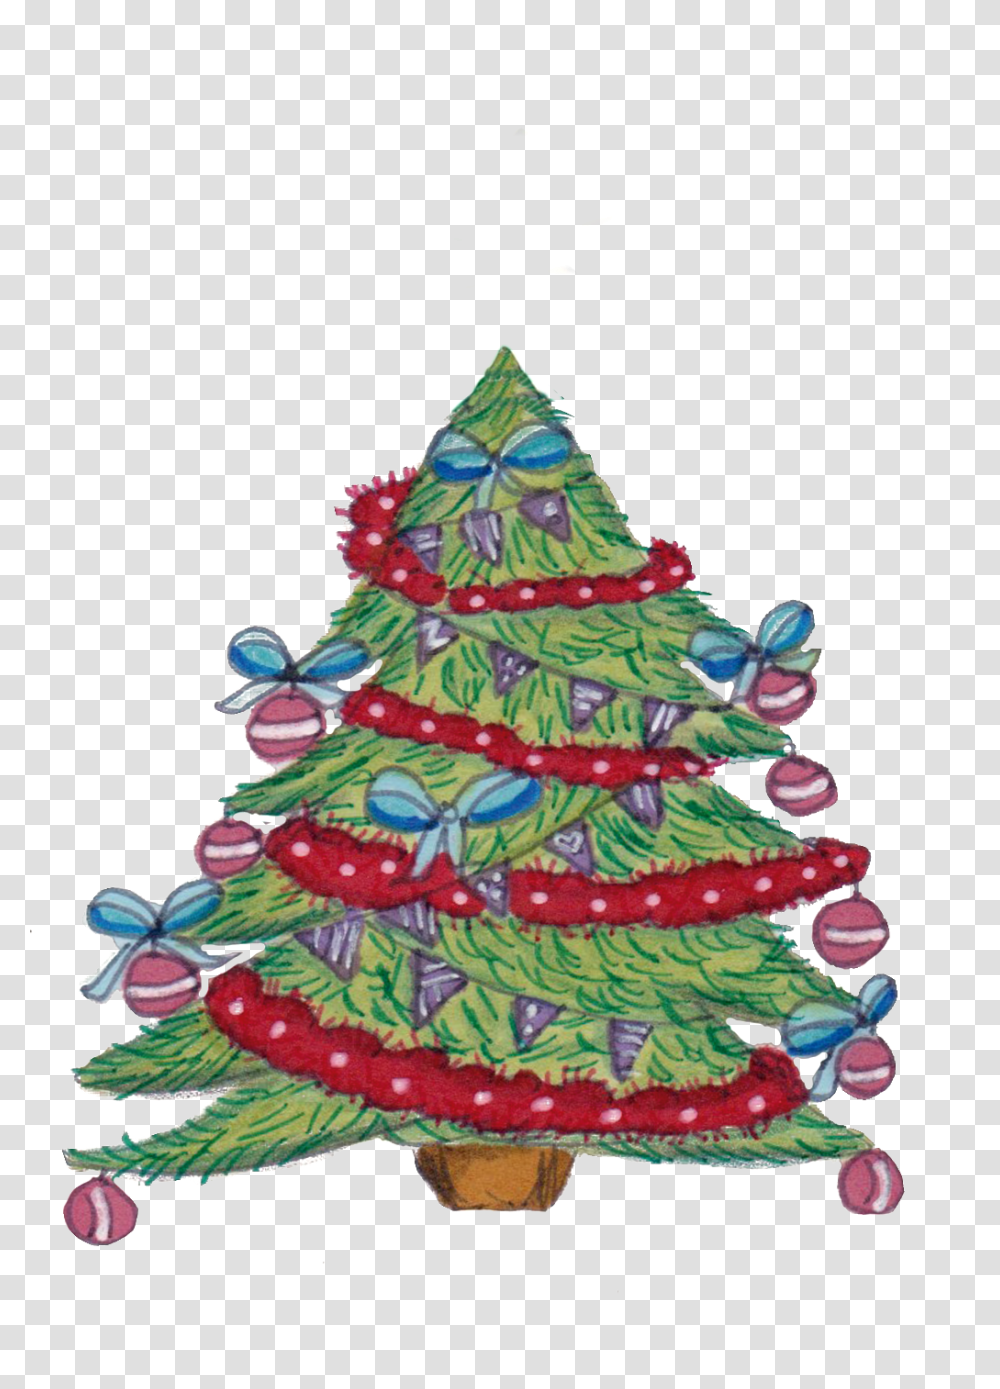 Painted Decorated Christmas Tree Free, Plant, Ornament, Wedding Cake, Dessert Transparent Png